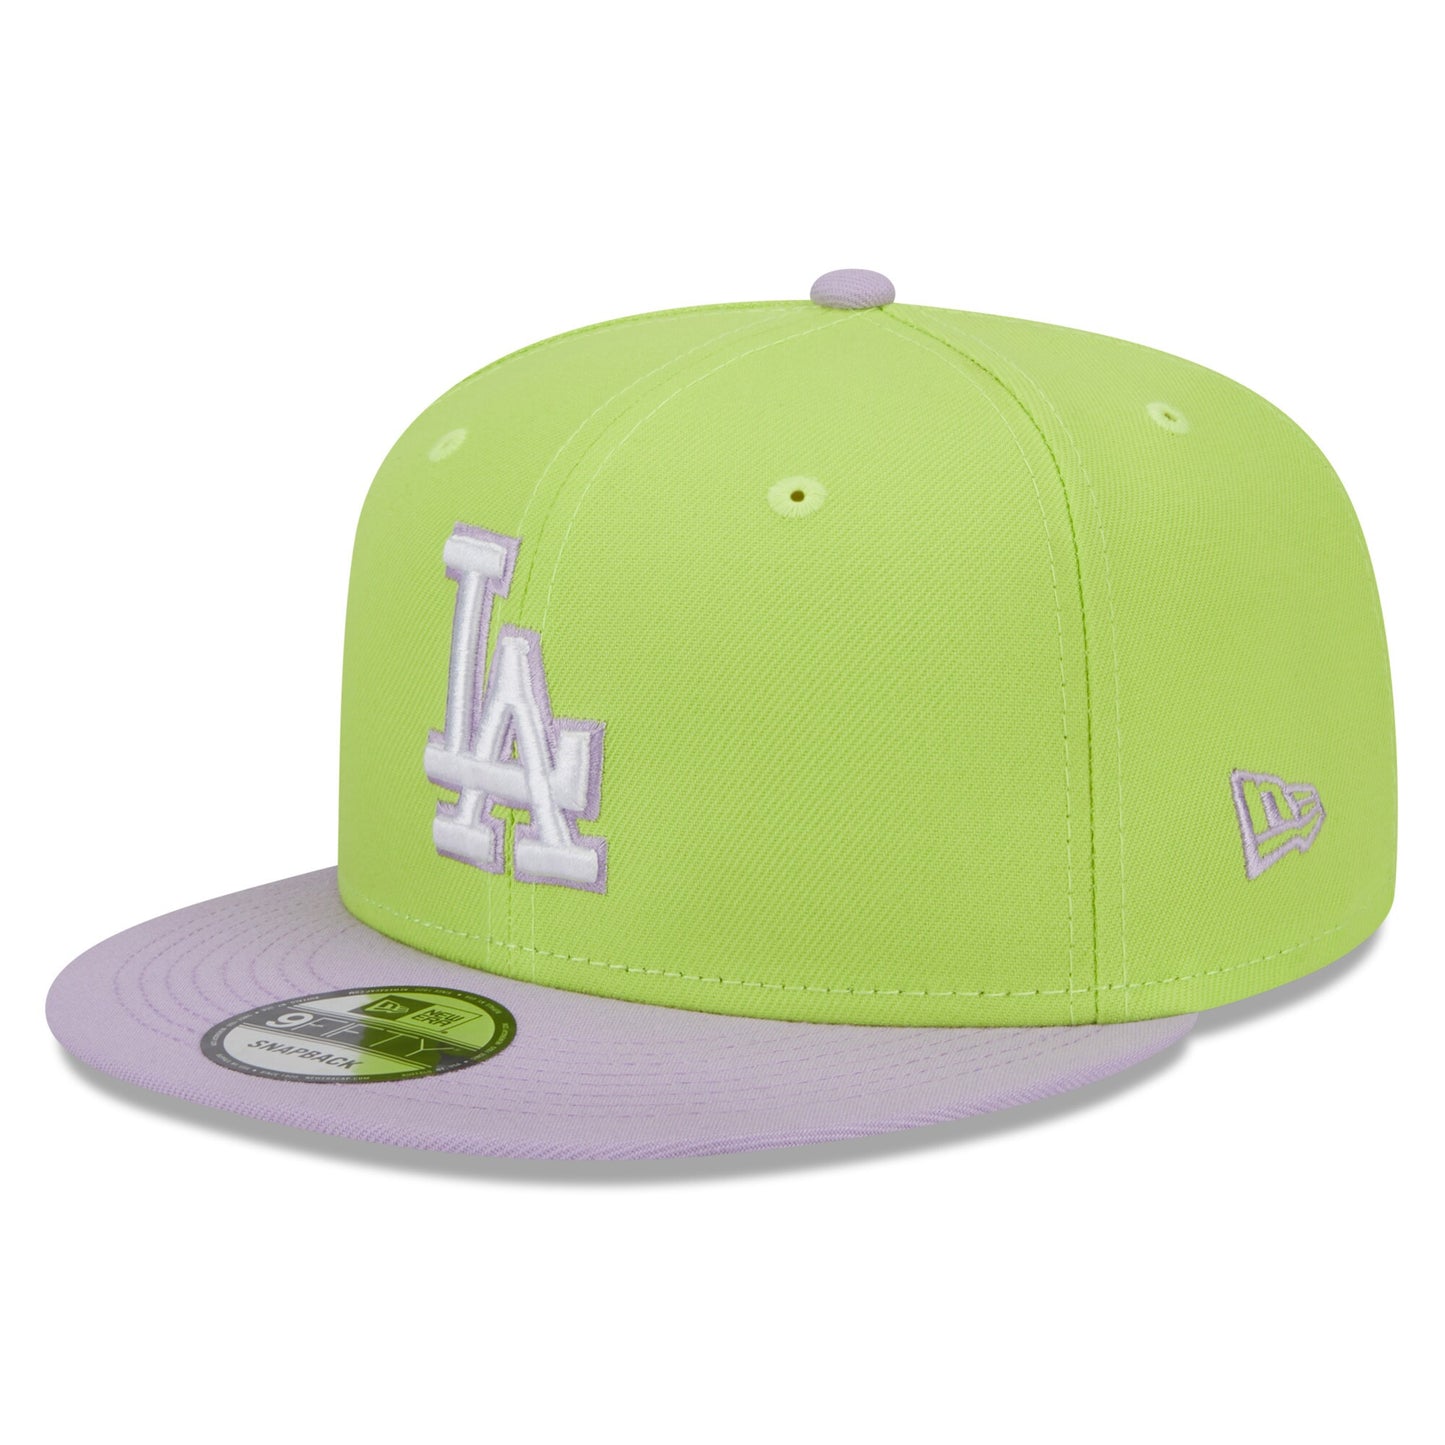 Los Angeles Dodgers New Era Spring Basic Two-Tone 9FIFTY Snapback Hat - Neon Green/Purple